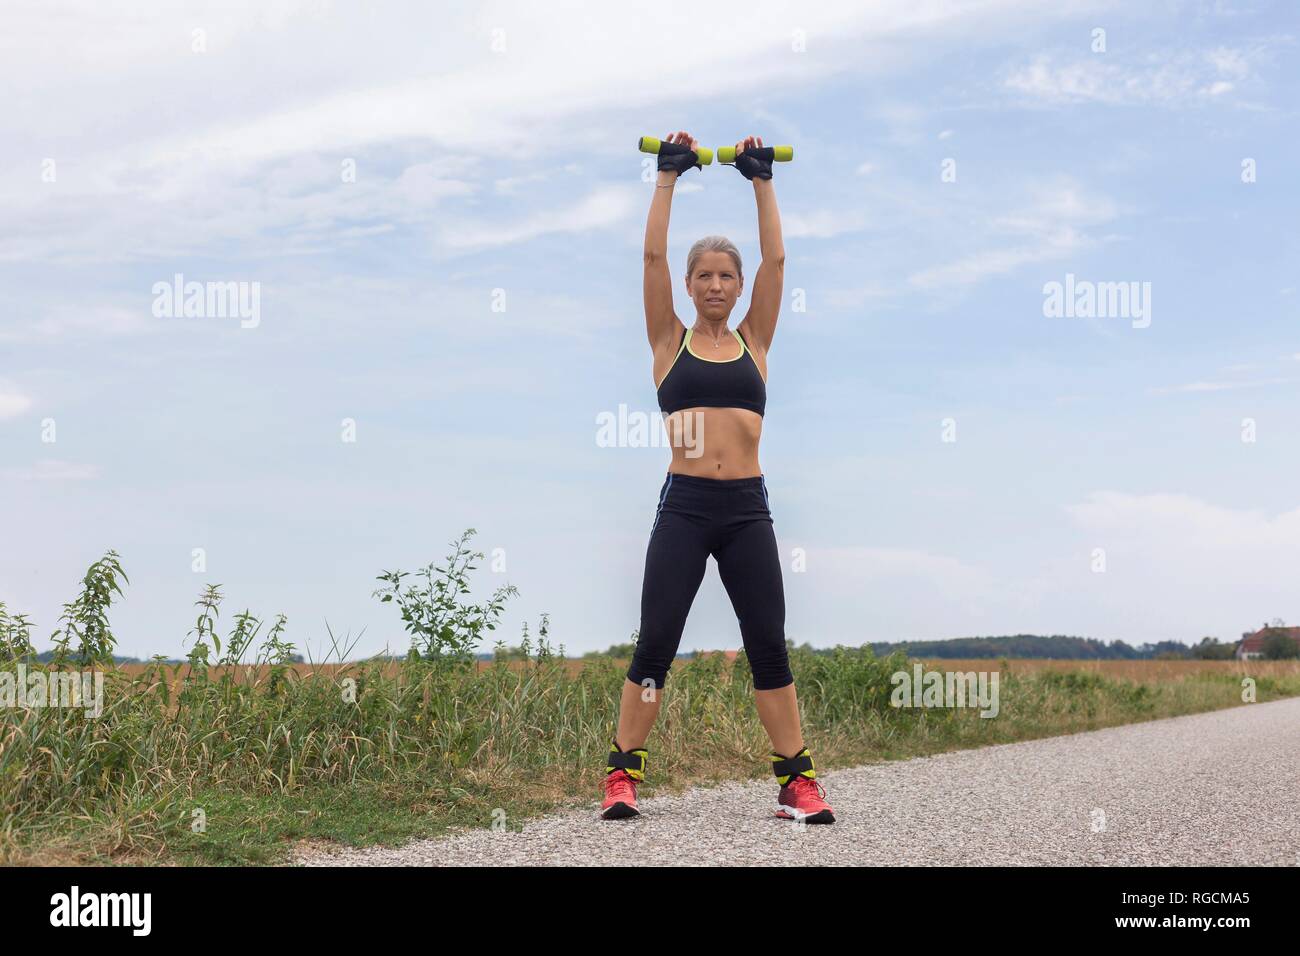 Mature woman doing workout on remote country lane in summer Stock Photo